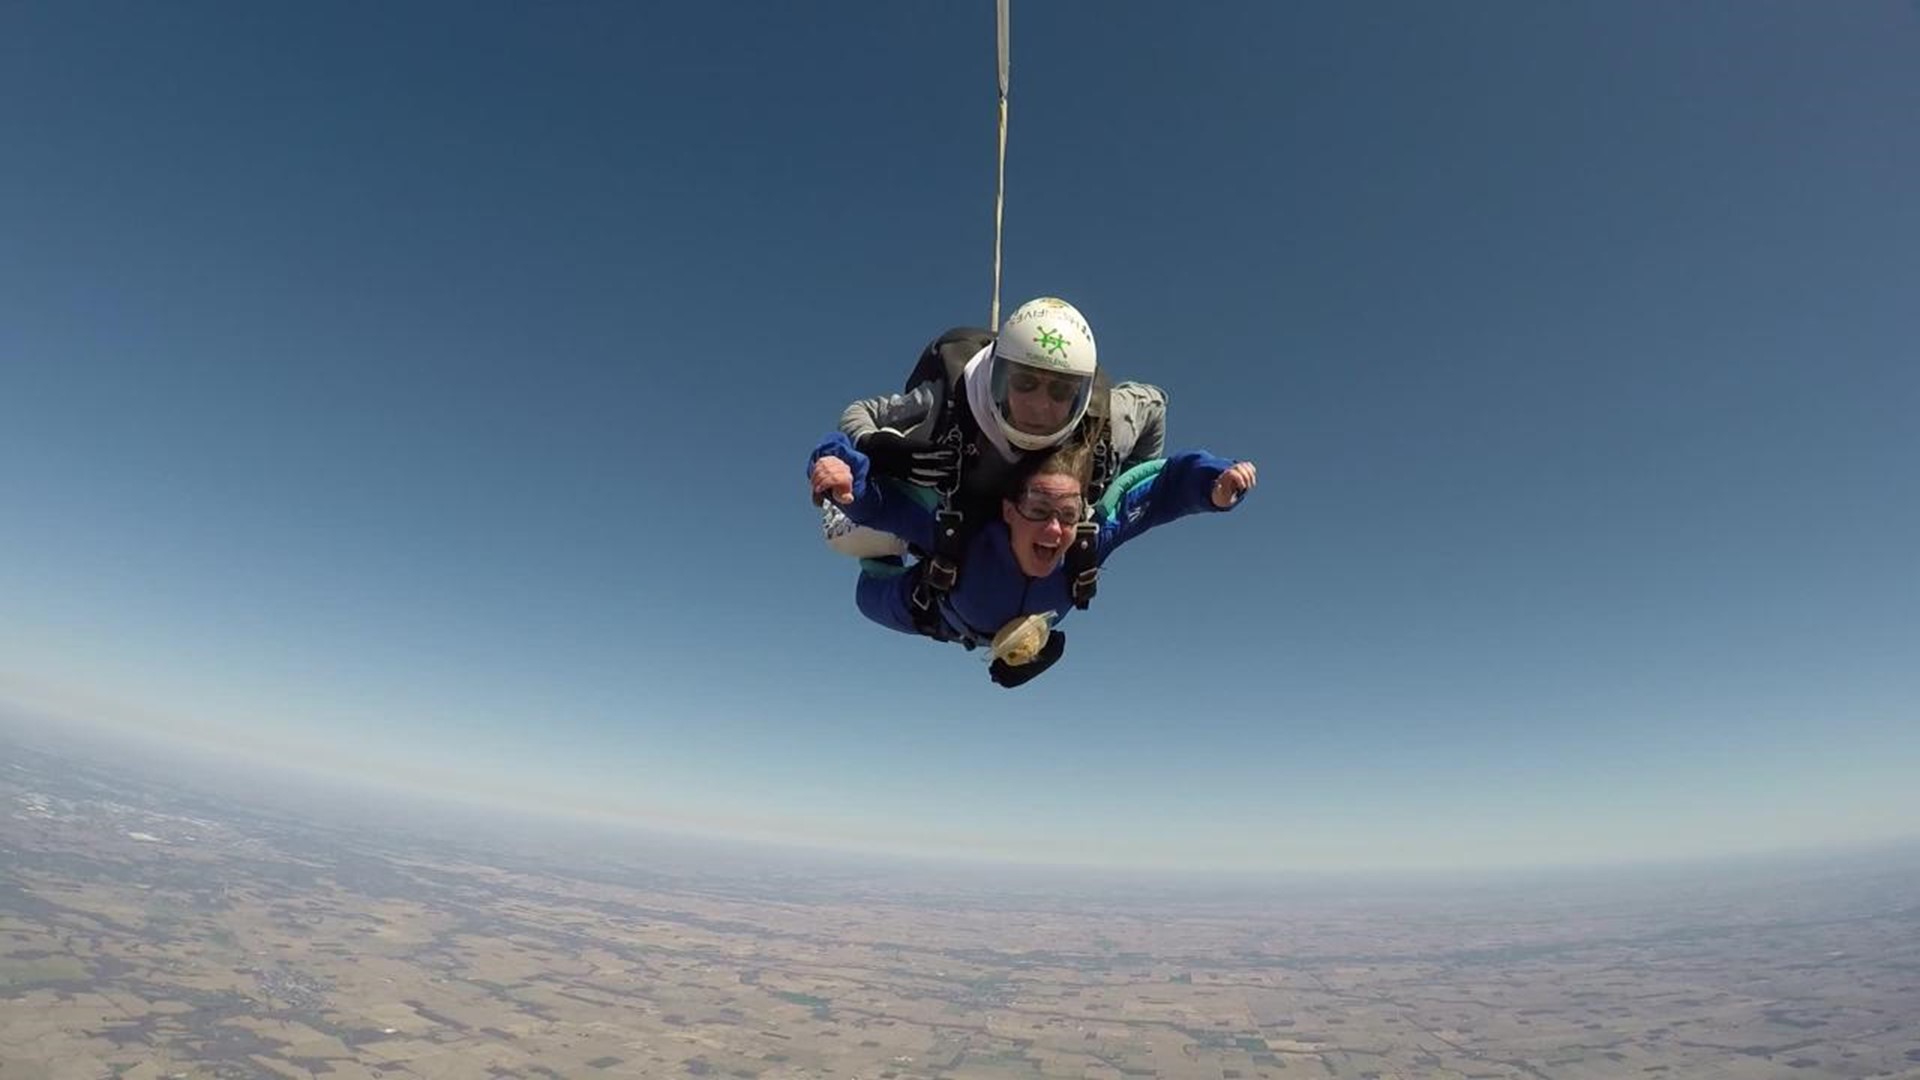 Watch Santa deliver some gifts while skydiving Red Bull